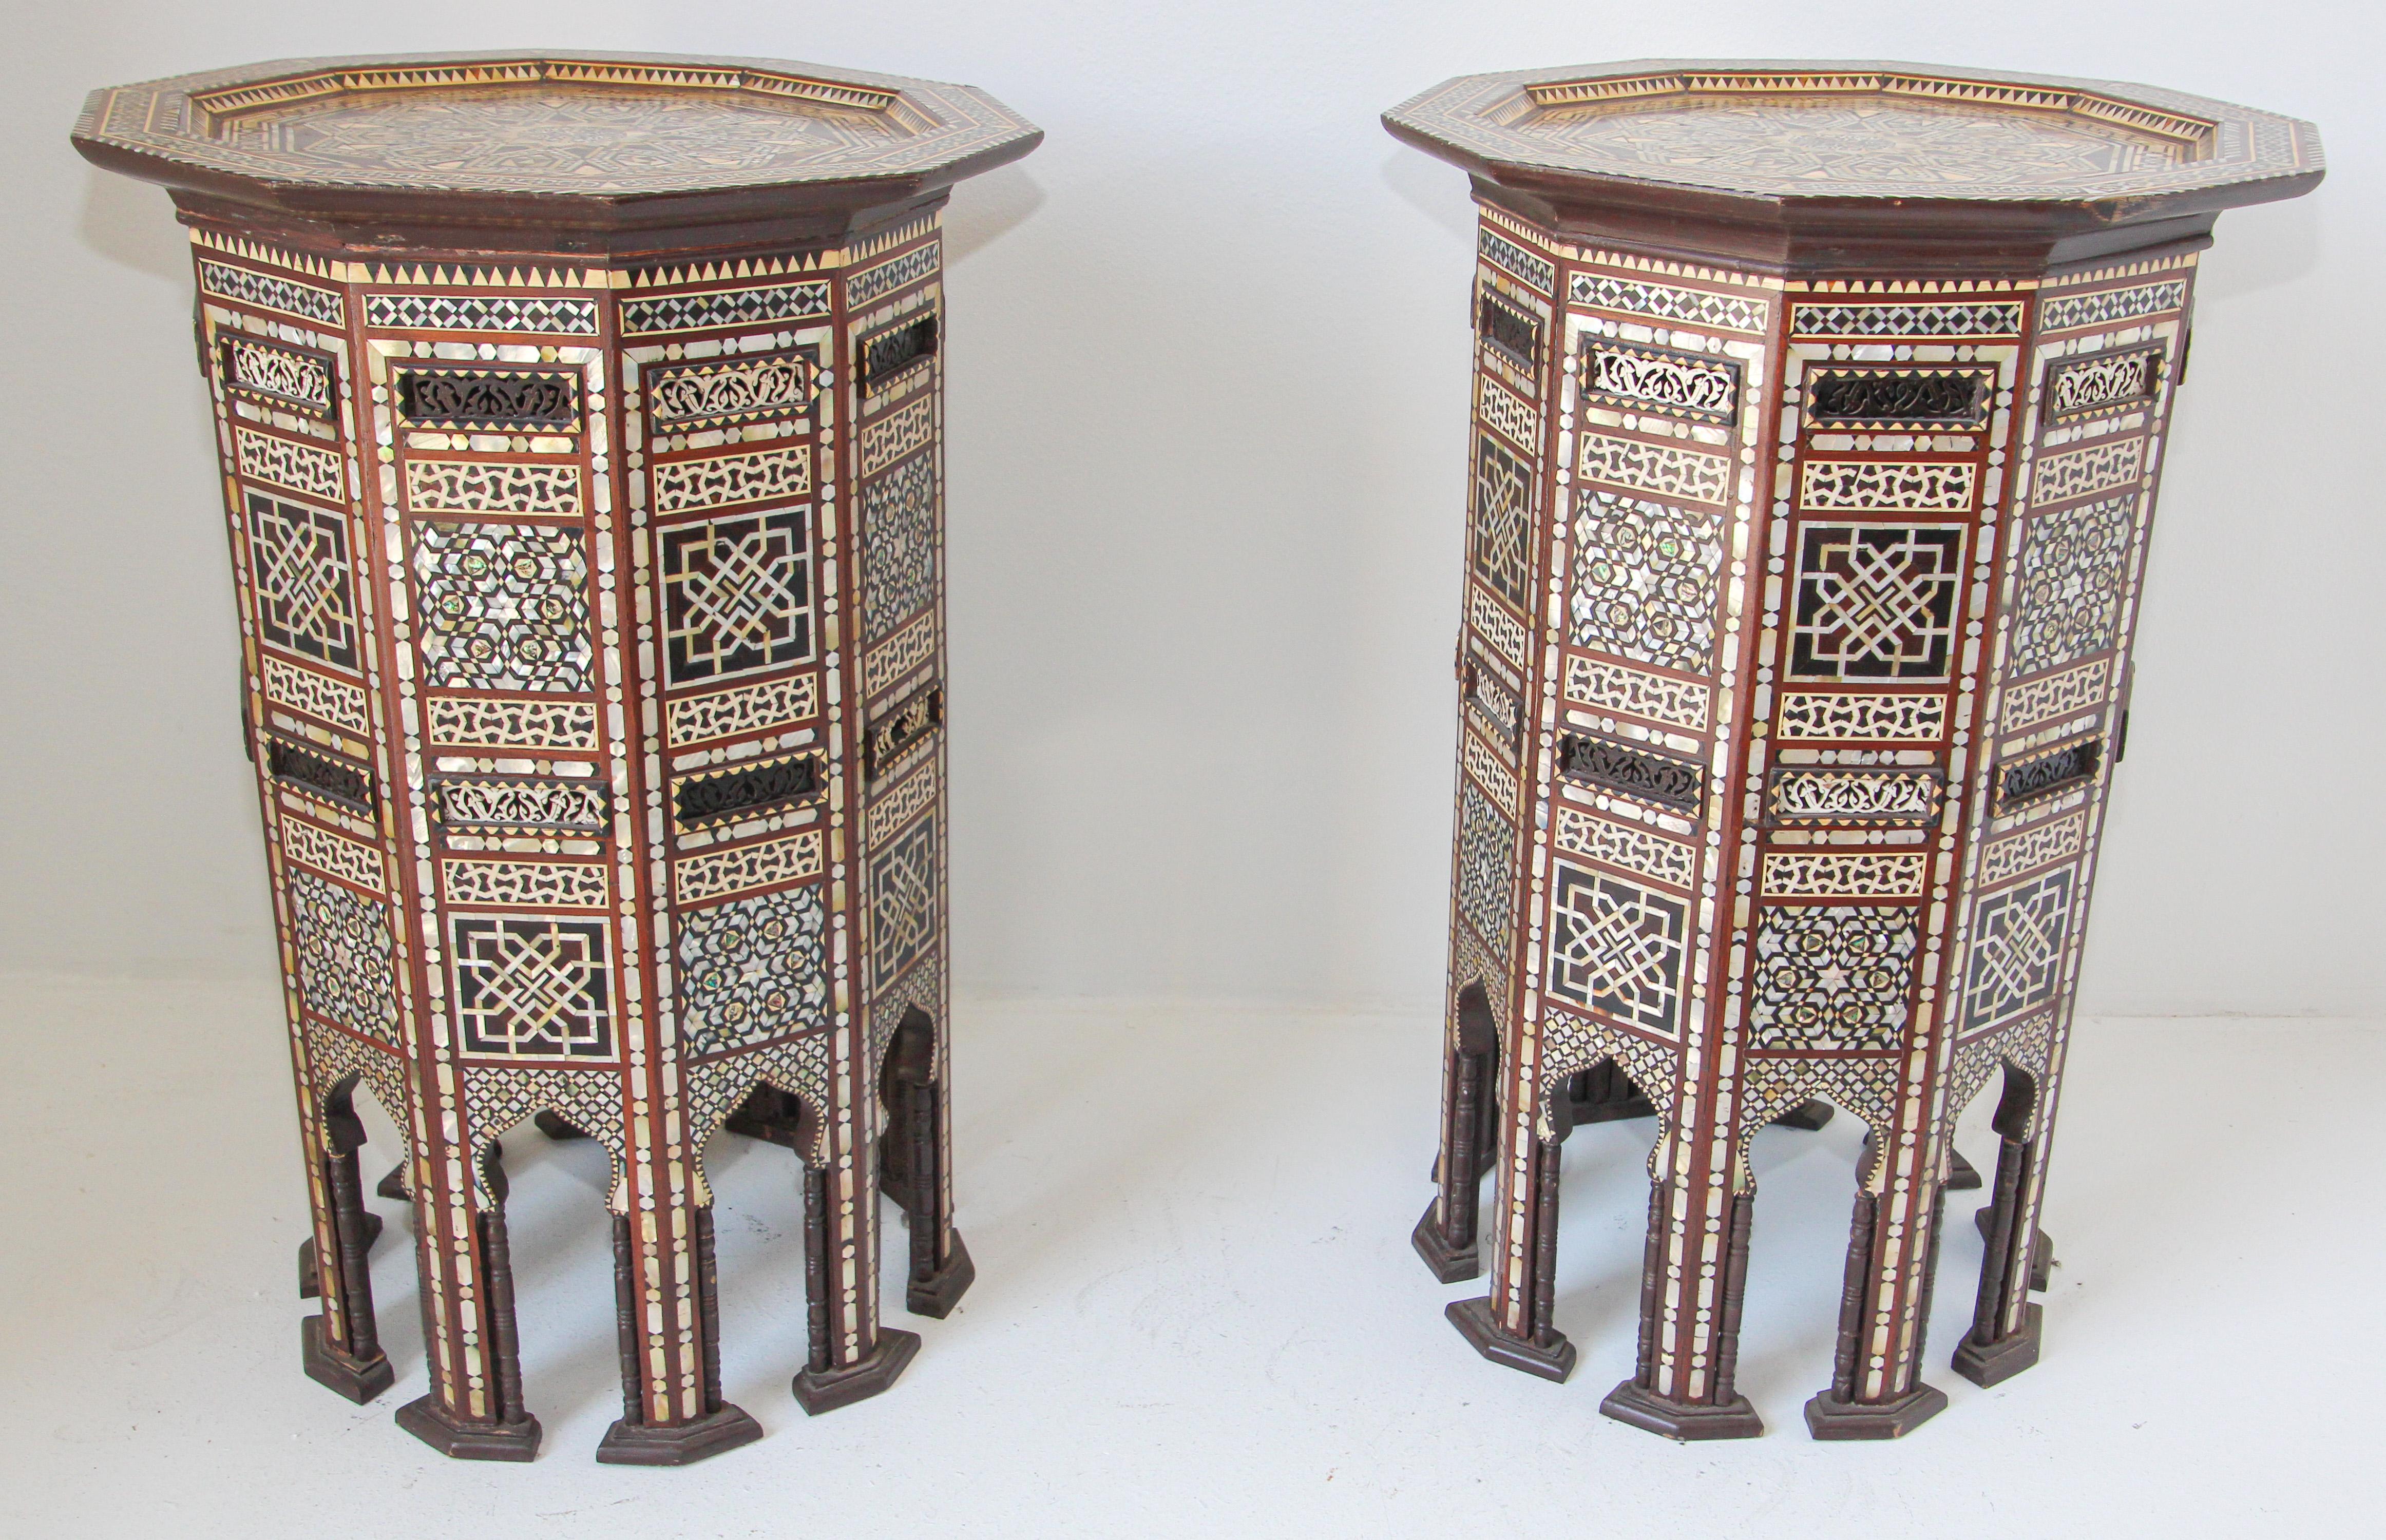 Pair of Moorish side pedestal tables inlaid with mosaic marquetry.
Pair of antique 19th century Middle Eastern Moorish mosaic marquetry inlay tables.
Outstanding very rare to find pair of Ottoman Turkish pedestal tables inlaid with mosaic